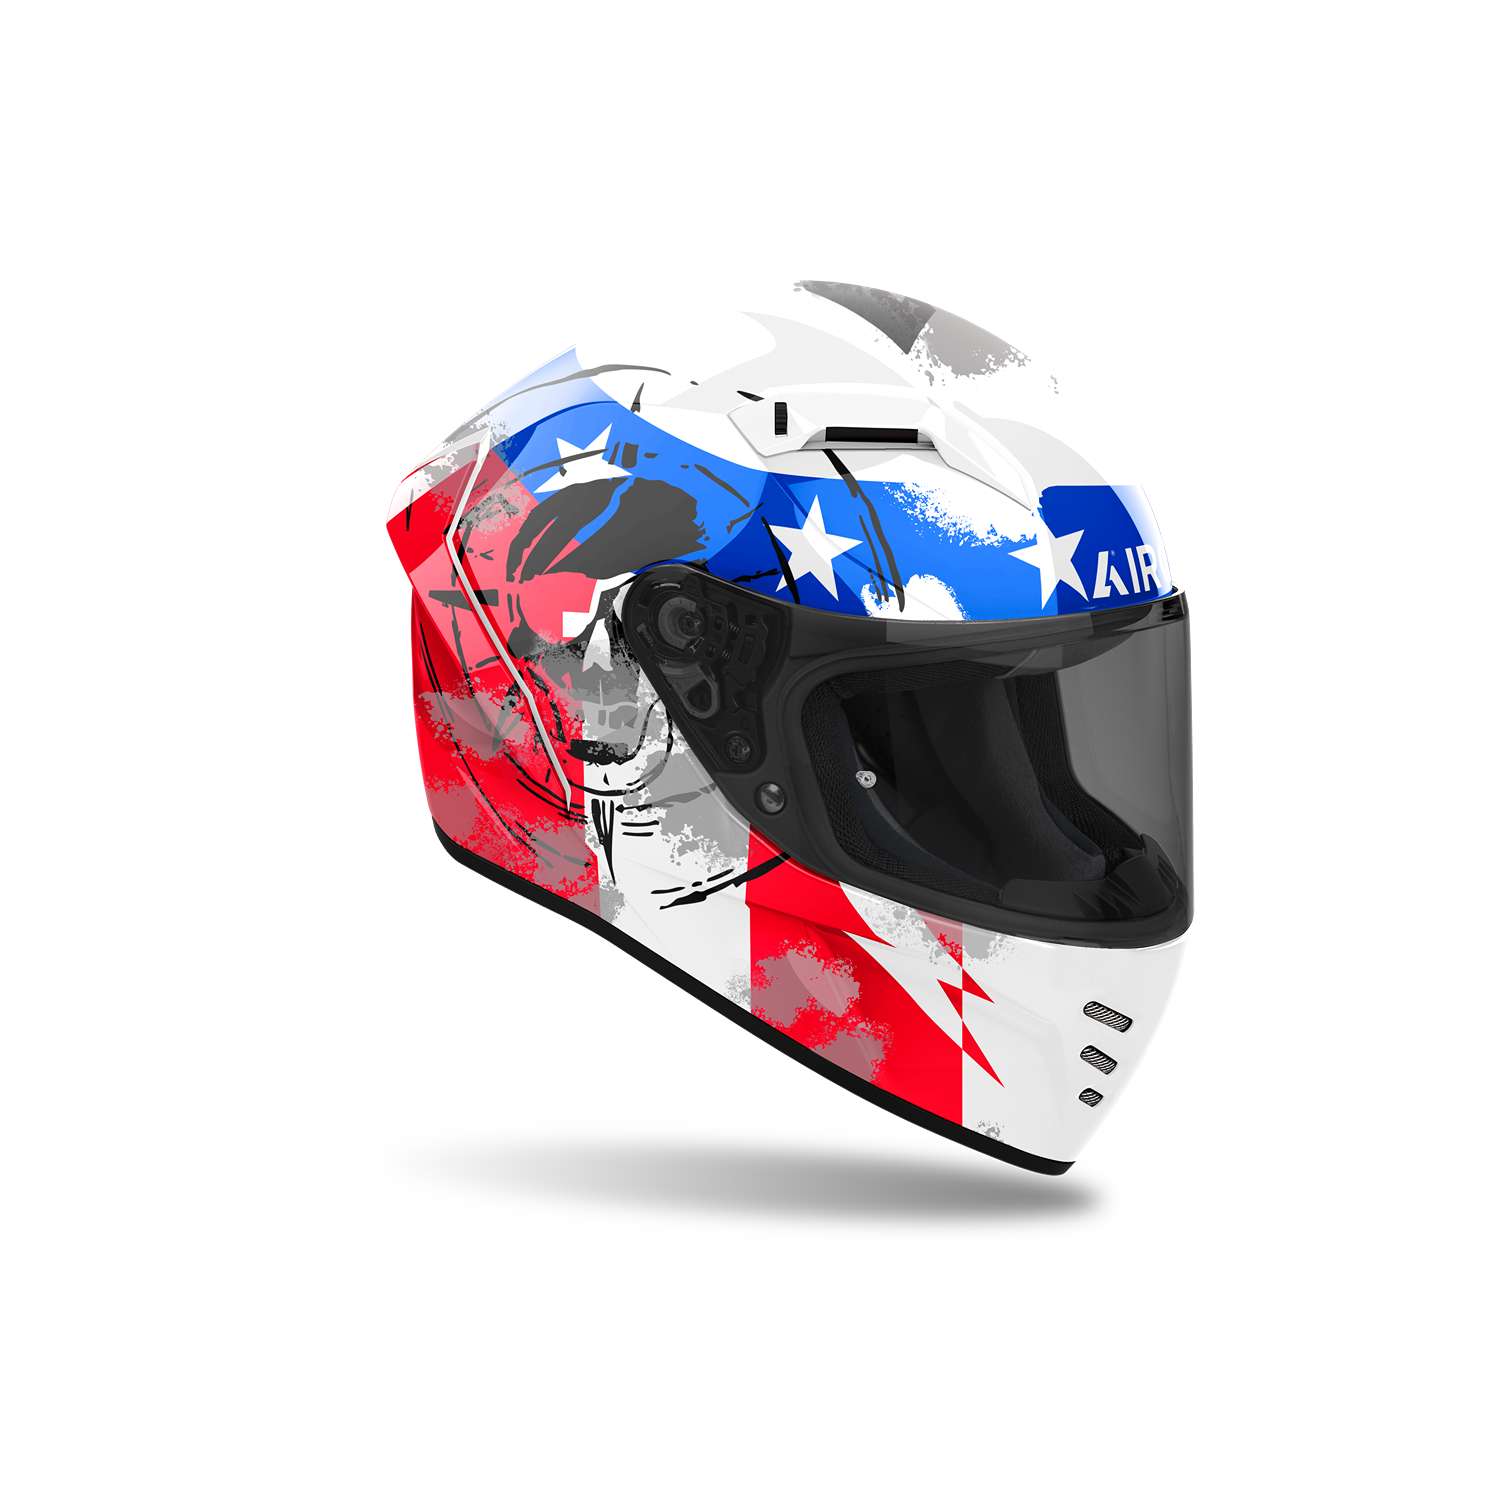 Image of Airoh Helmet Connor Nation Full Face Helmet Size S ID 8029243355700